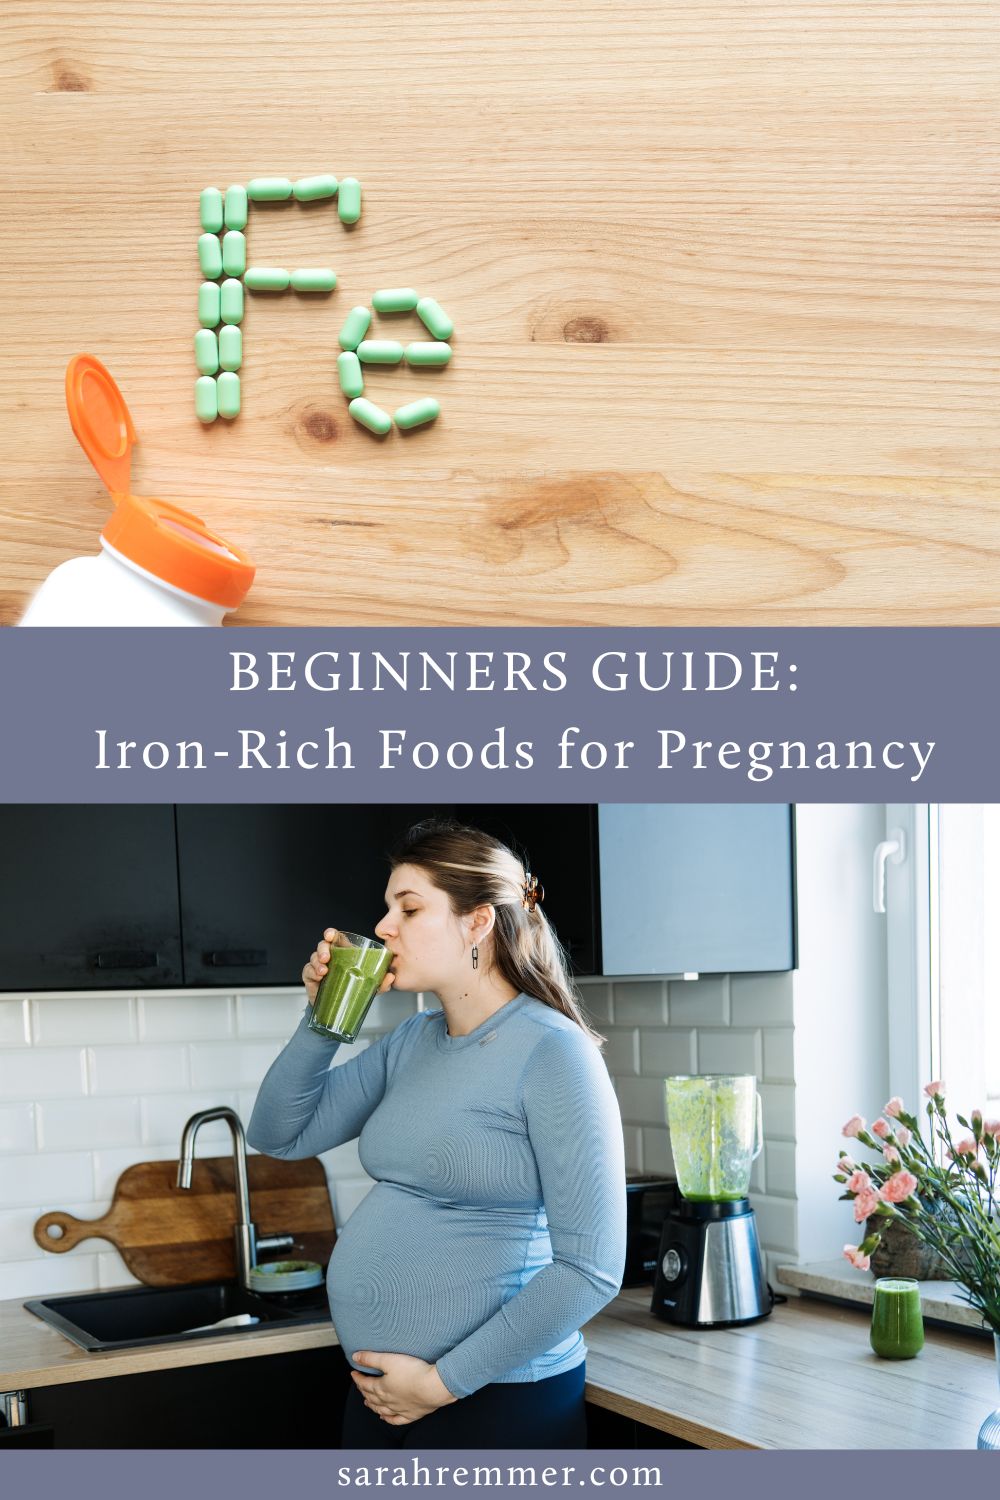 Pregnant and worried about getting enough iron? As a registered dietitian, here's a list of iron-rich foods for pregnancy.